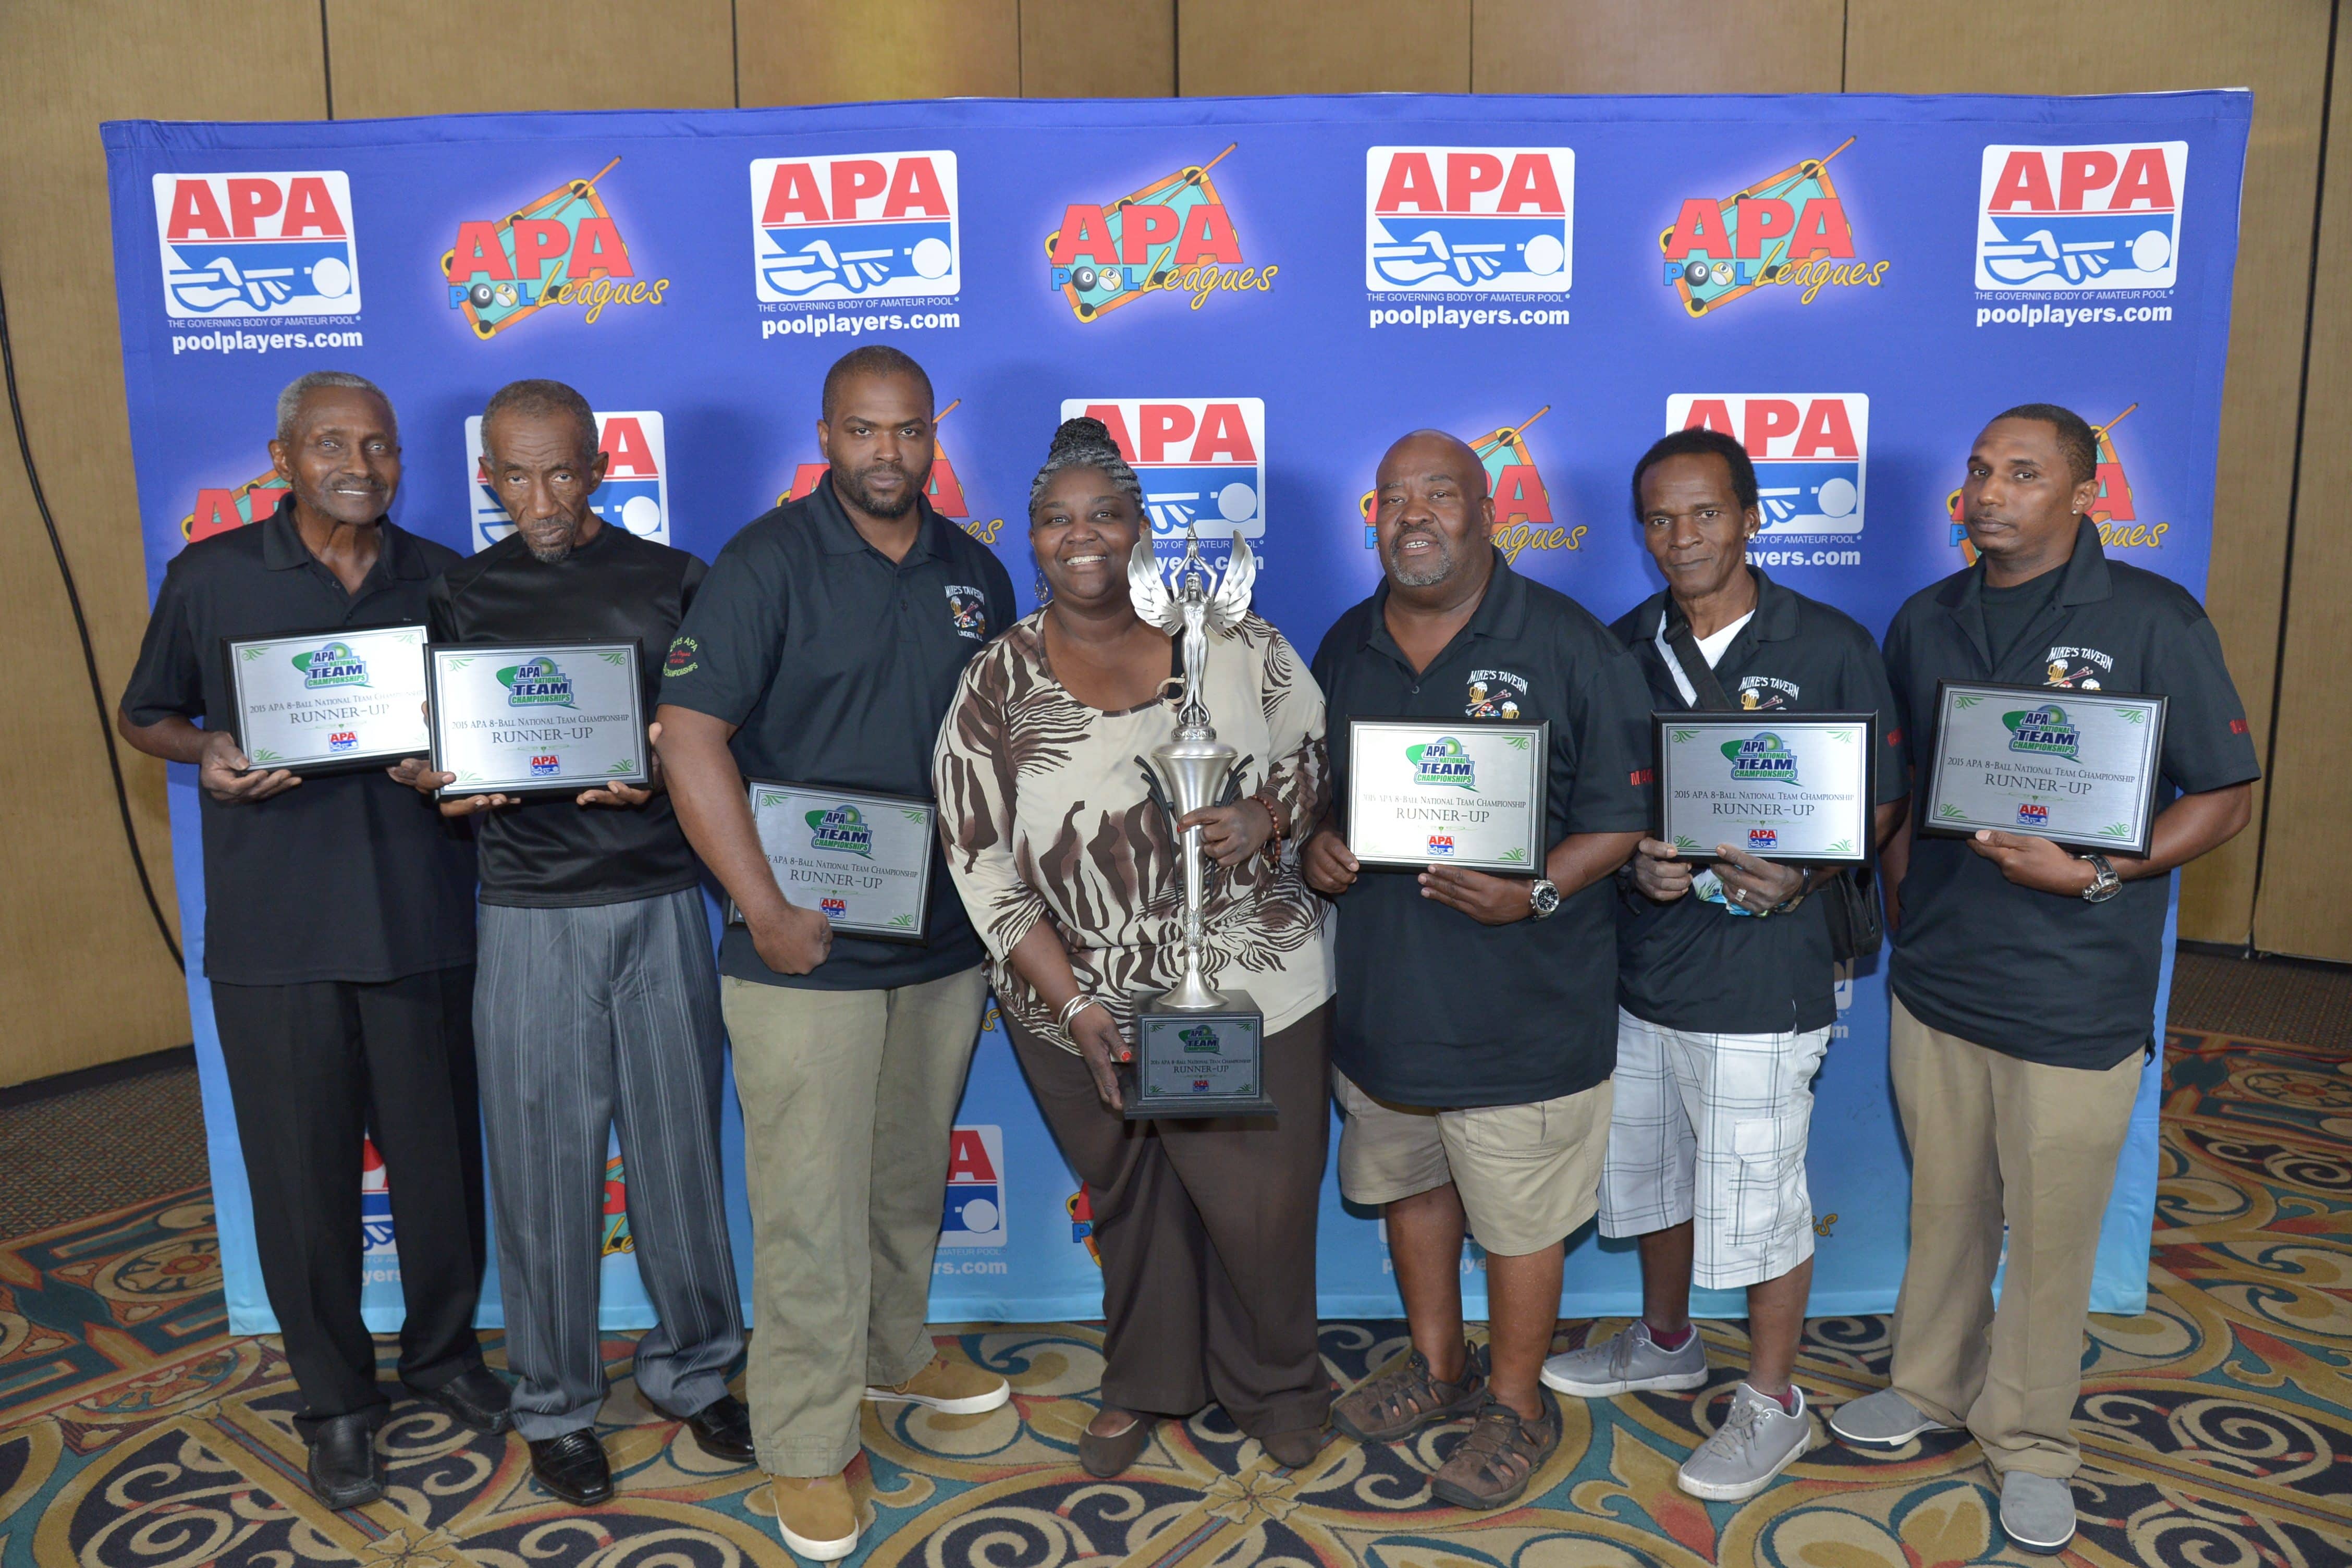 <strong>Runners-Up: Mike’s Magnums of Linden, NJ - </strong>(L to R): Nathaneil Alvin, Hiram Blackburn, Michael Green, Katrina Williams, Eugene Lewis, Joseph Mikell, Terence Peterson